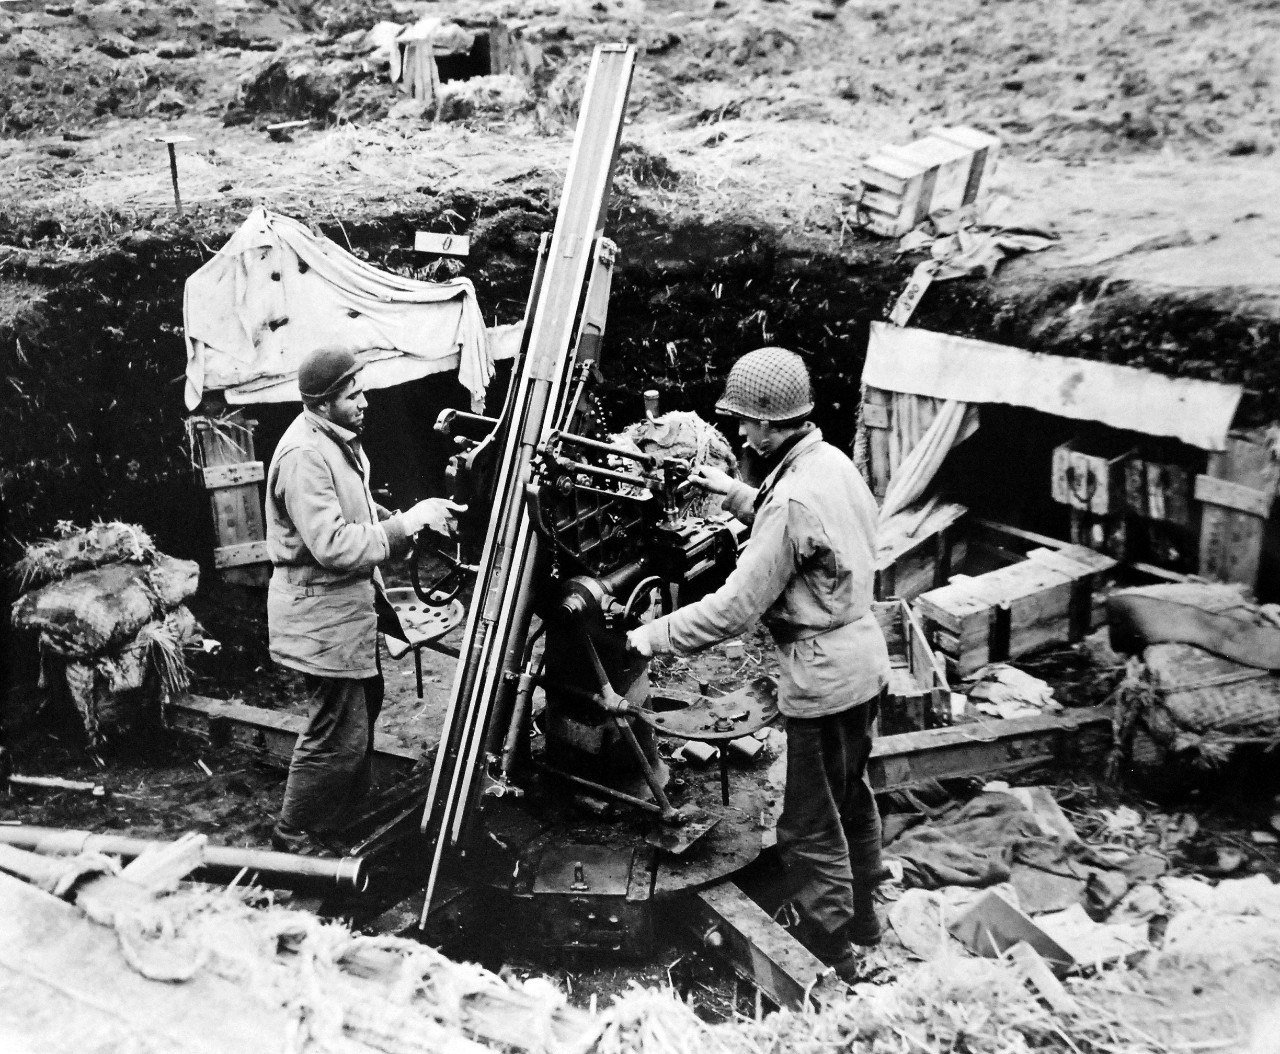 LC-Lot-803-33:  Aleutian Islands Campaign, June 1942 - August 1943.   Allied Landing on Attu Island, May 11 1943. This One Won’t Point At U.S. Planes Again.  Americans examine a Japanese anti-aircraft gun on a hill at head of west arm of Holtz Bay.  This was one of the strong Japanese positions from which Americans drove their troops.  Barrel of gun is on ground, left foreground, May 19, 1943.  U.S. Navy photograph, released May 29, 1943.   Photographed through Mylar sleeve.  Courtesy of the Library of Congress.  (2015/11/06).